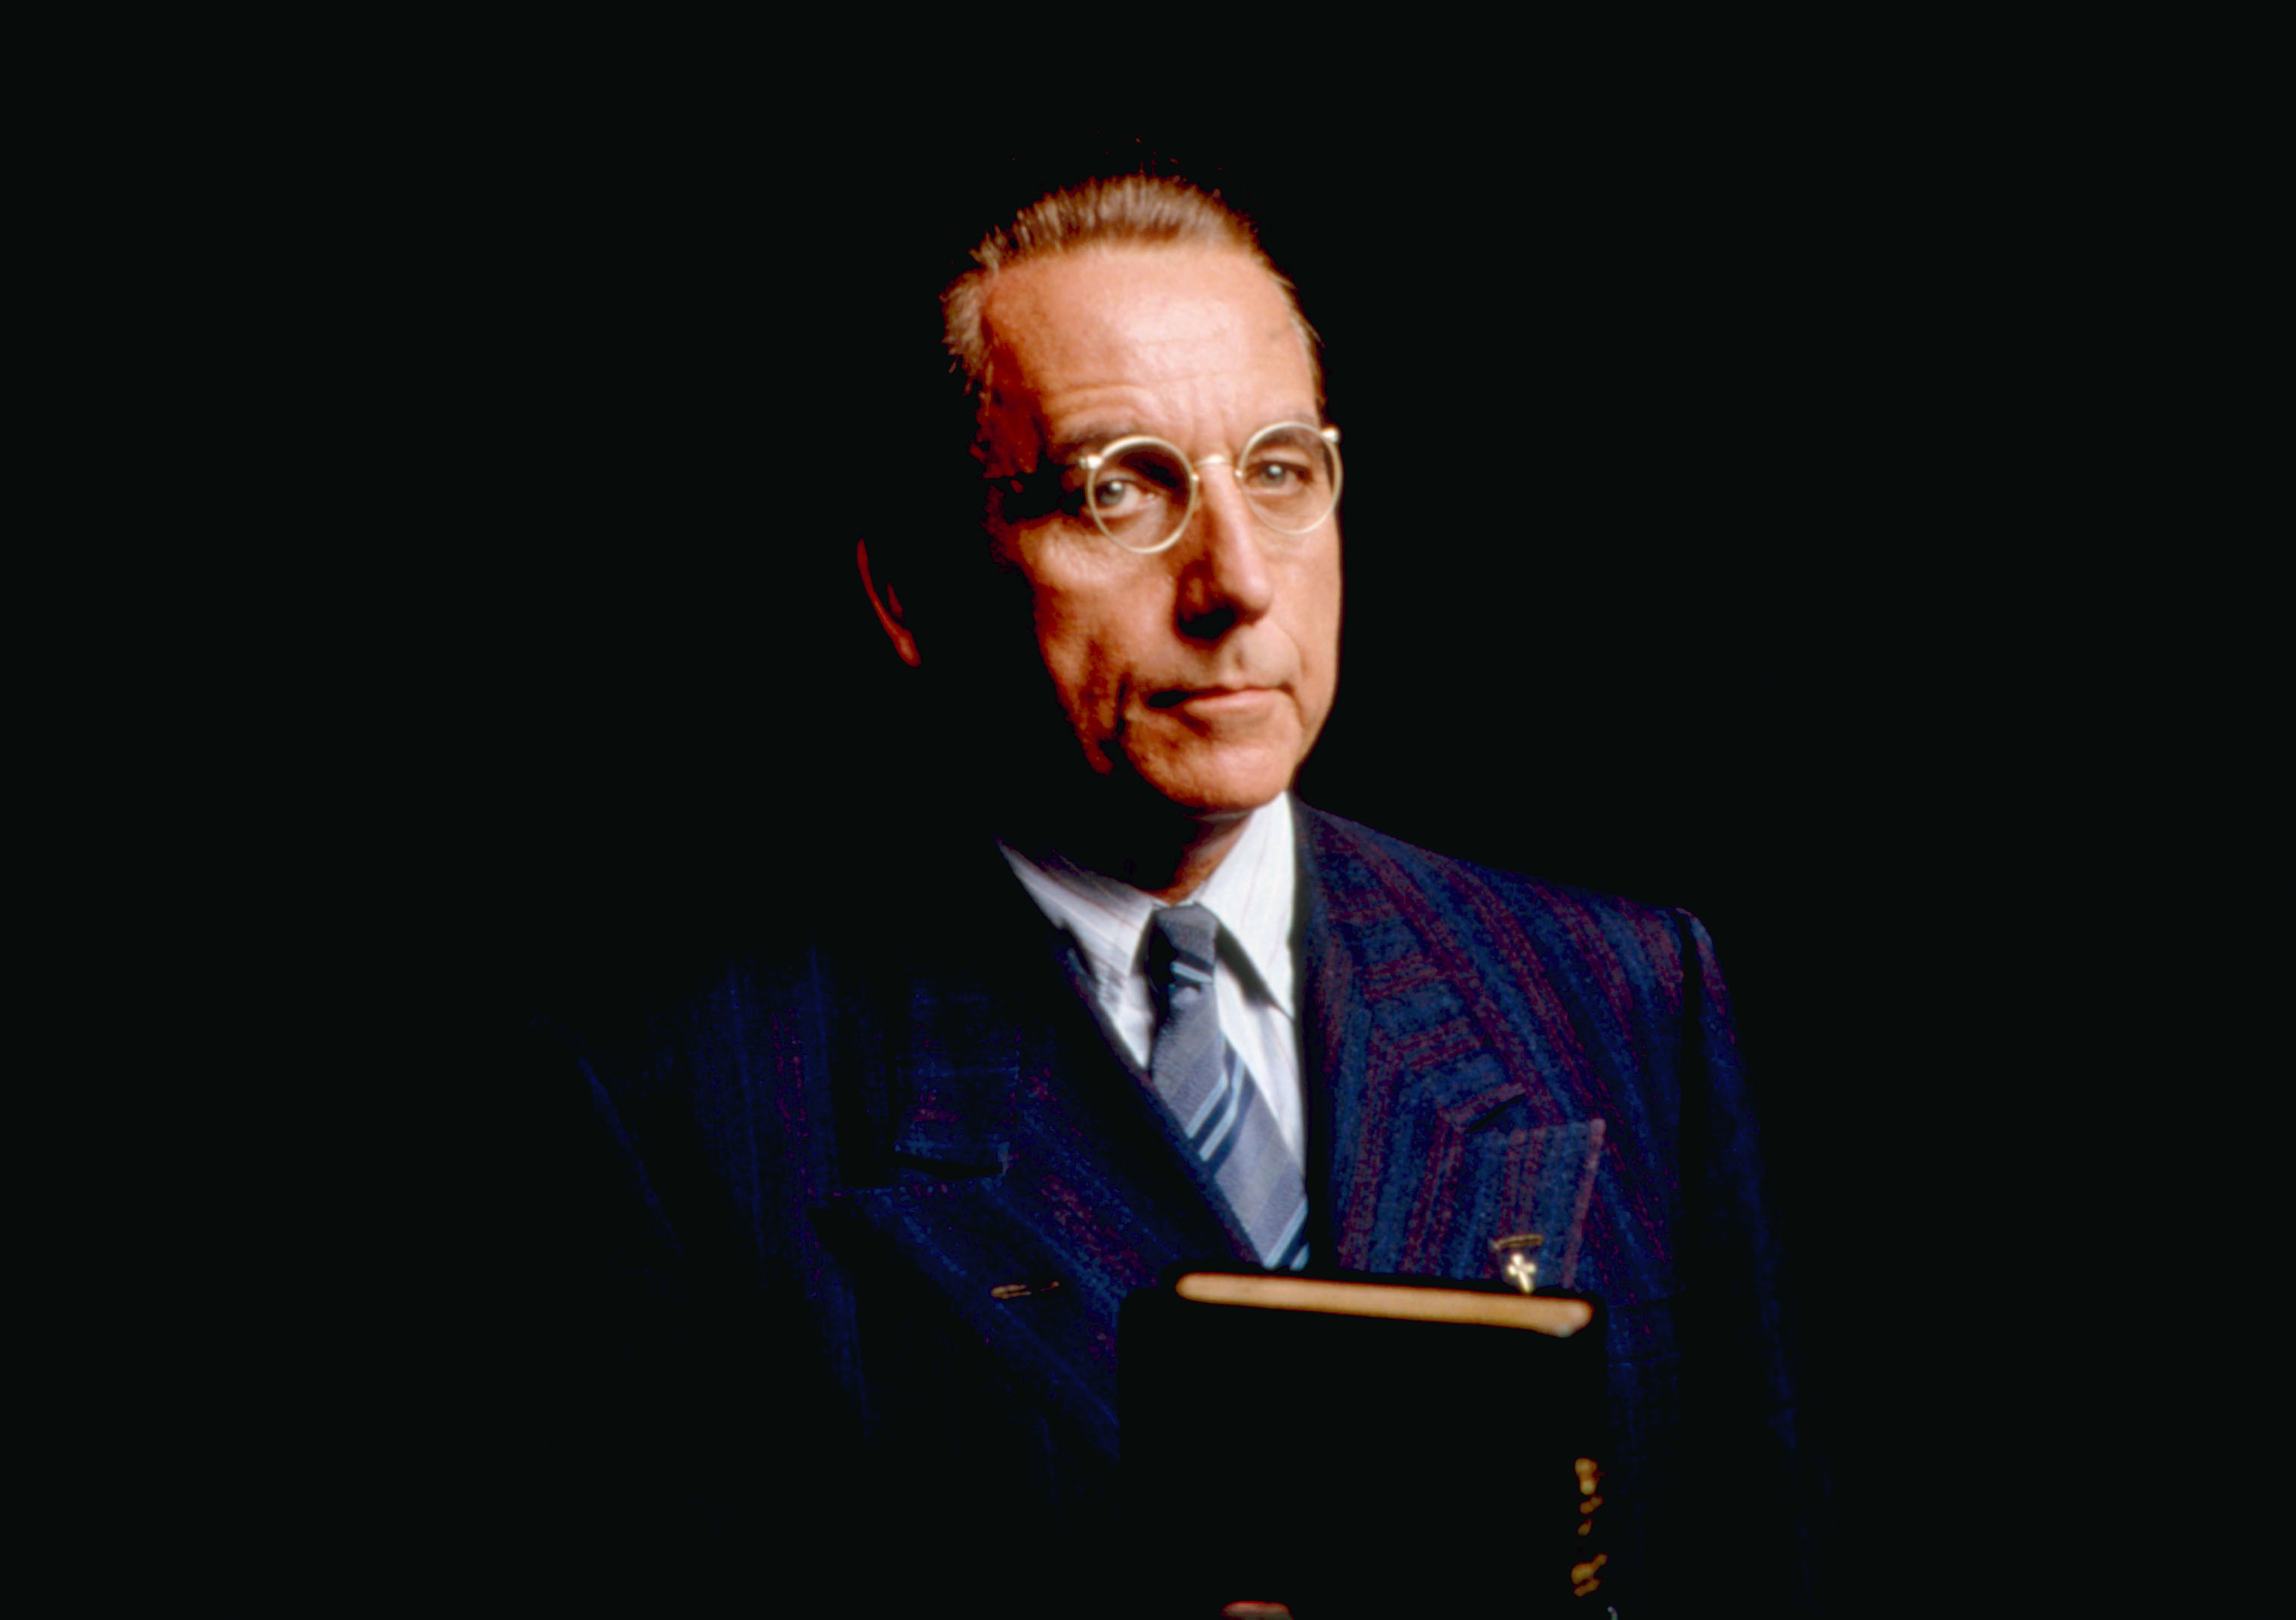 A man in formal attire, wearing a suit and tie, holds an object while looking ahead against a dark background